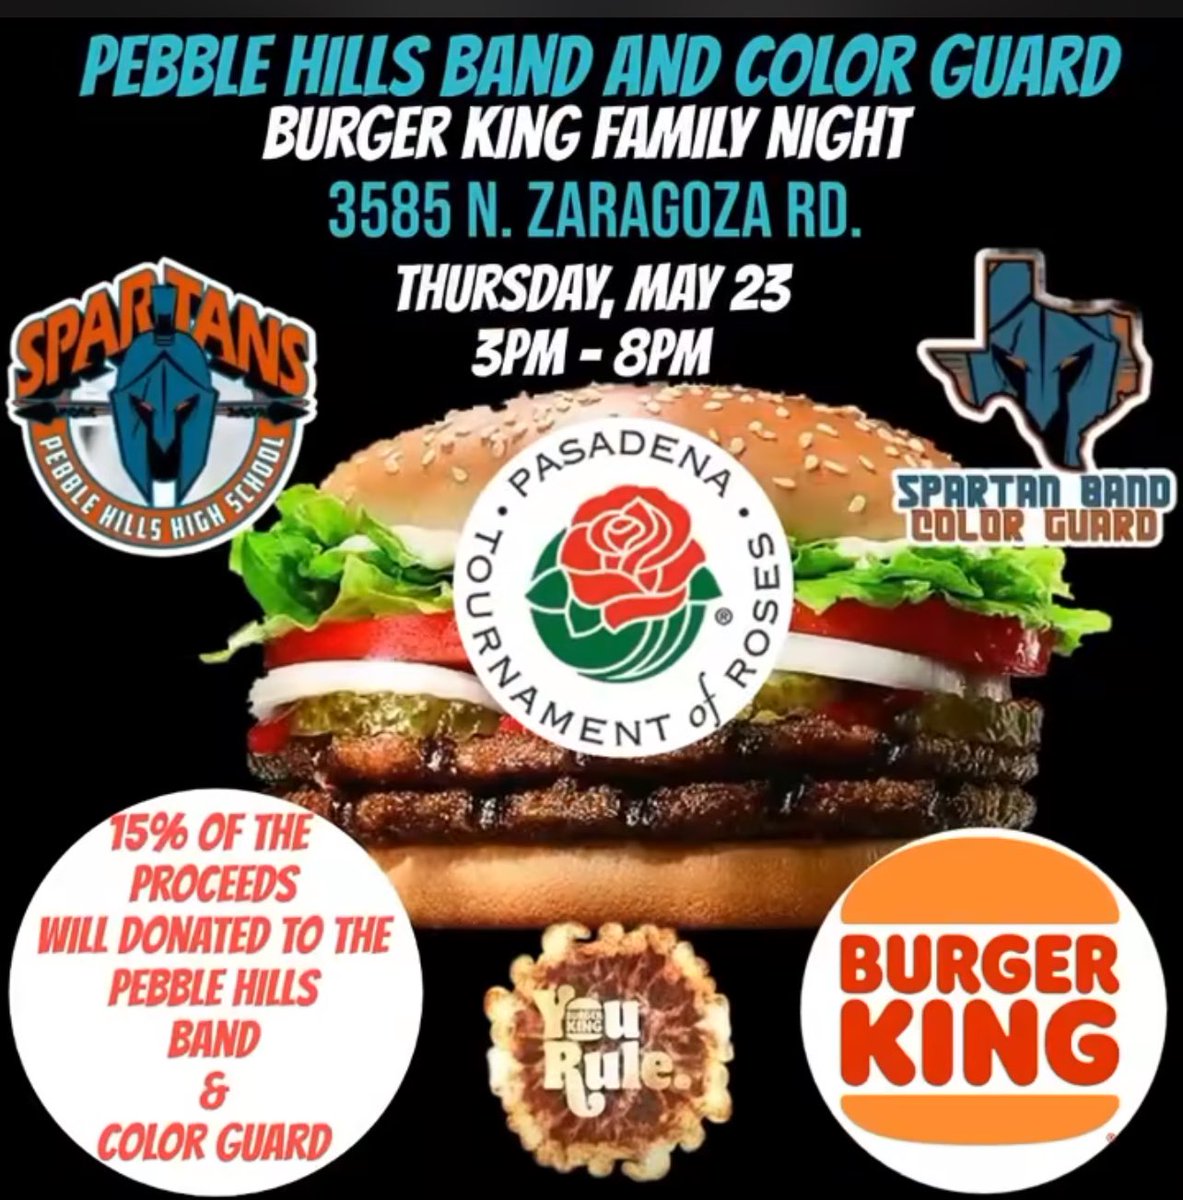 Come out tonight and support the Pebble Hills HS Band and Colorguard and help them raise funds for the Tournament of Roses Parade! #TeamSISD #SISDFineArts